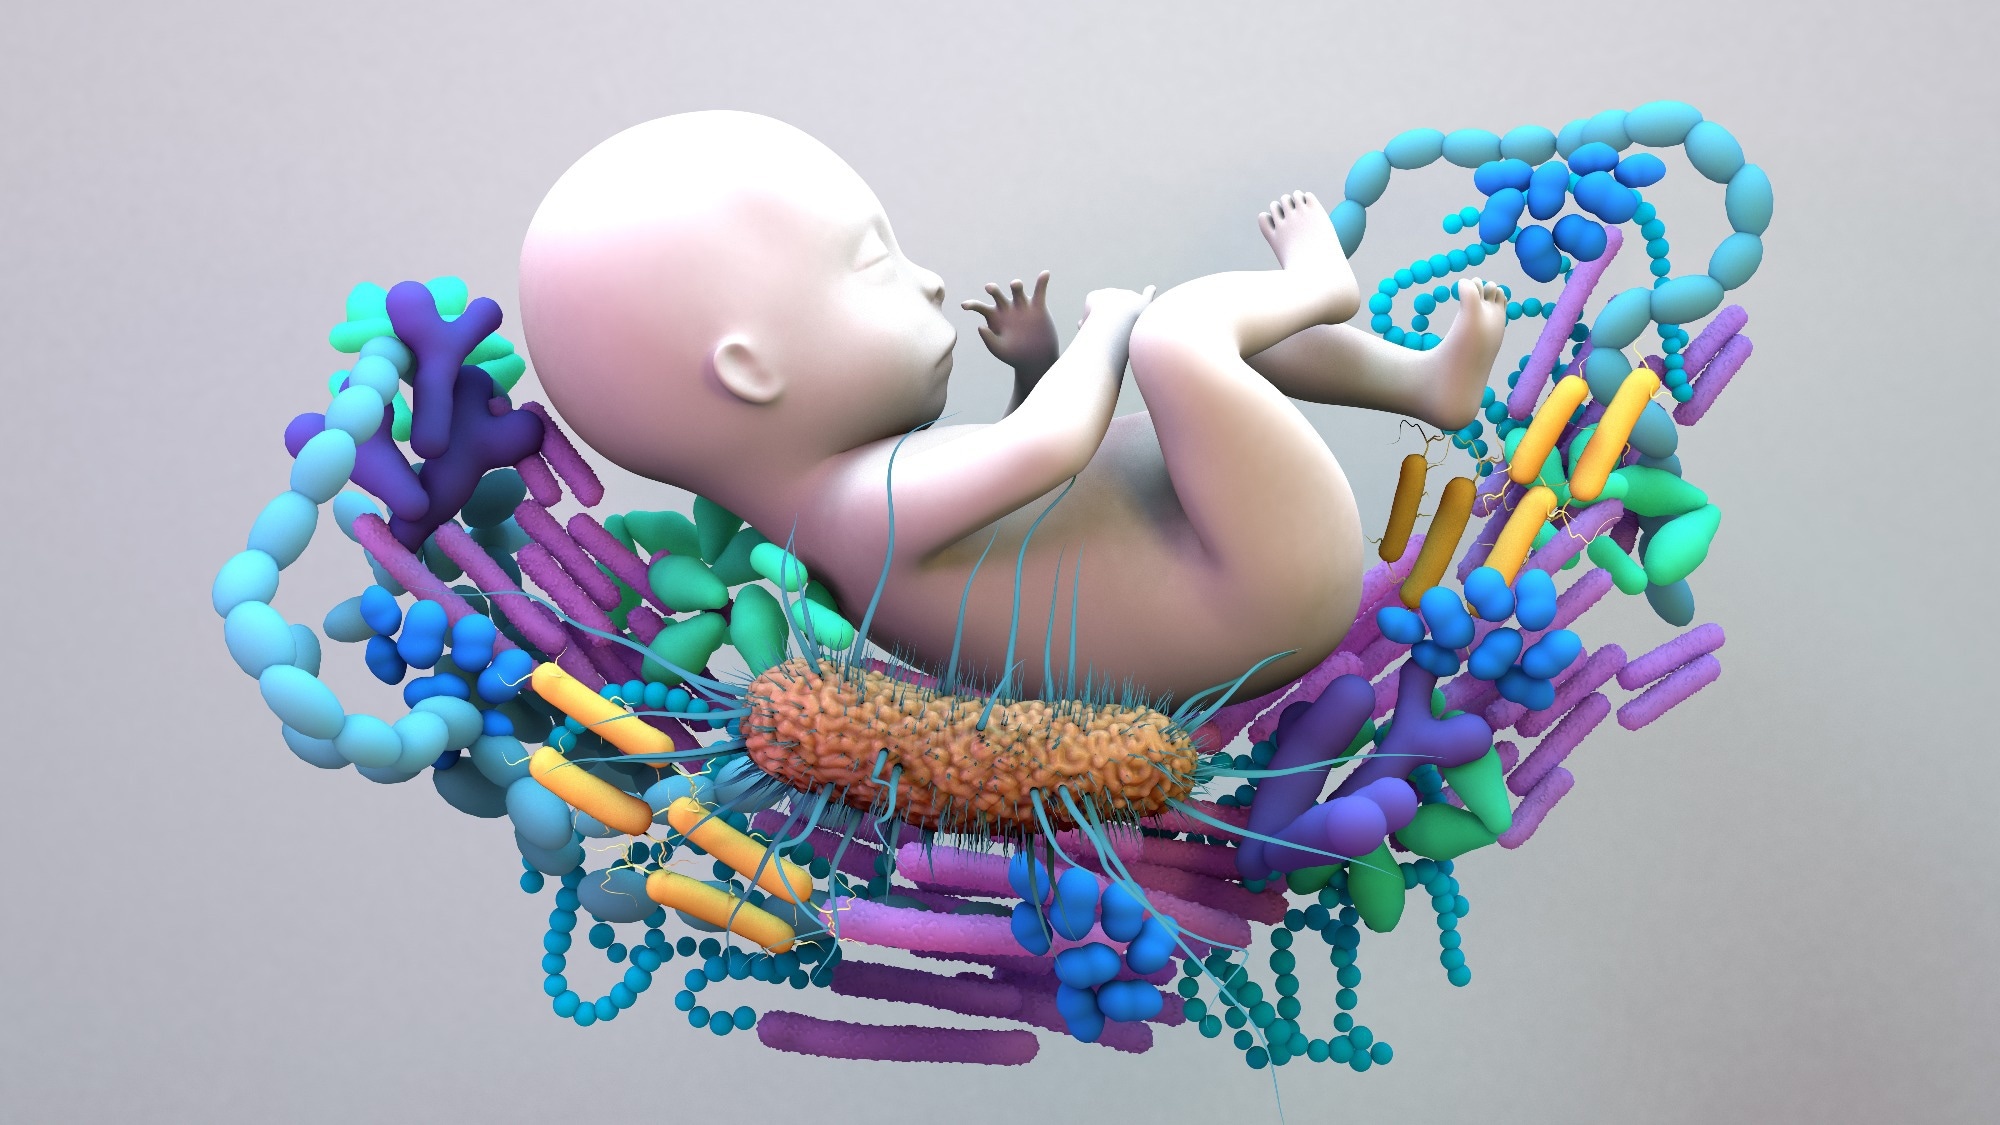 Study: Early-Life Gut Microbiota Governs Susceptibility to Colitis via Microbial-Derived Ether Lipids. Image Credit: Design_Cells / Shutterstock